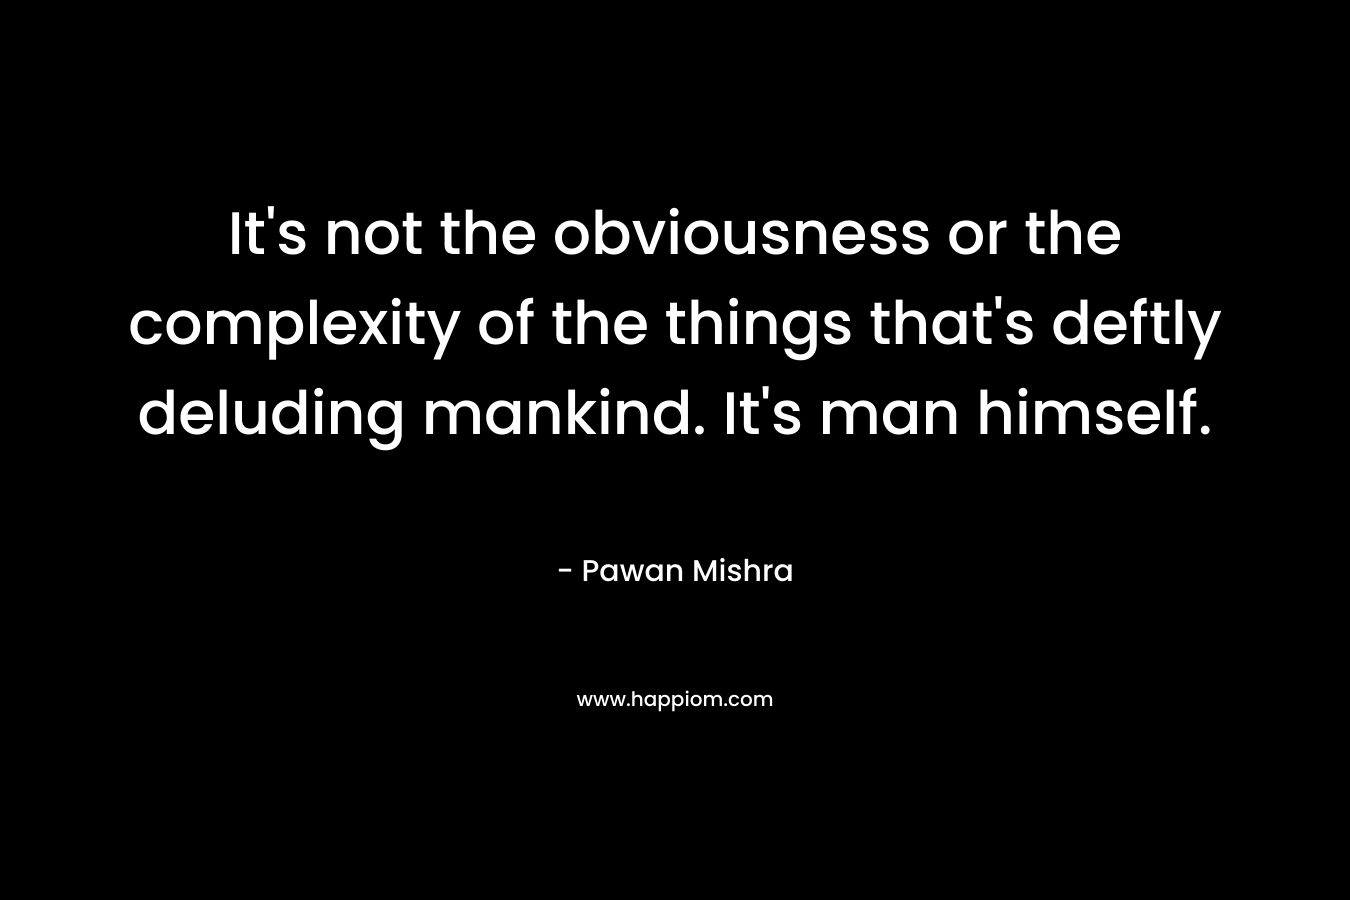 It's not the obviousness or the complexity of the things that's deftly deluding mankind. It's man himself.